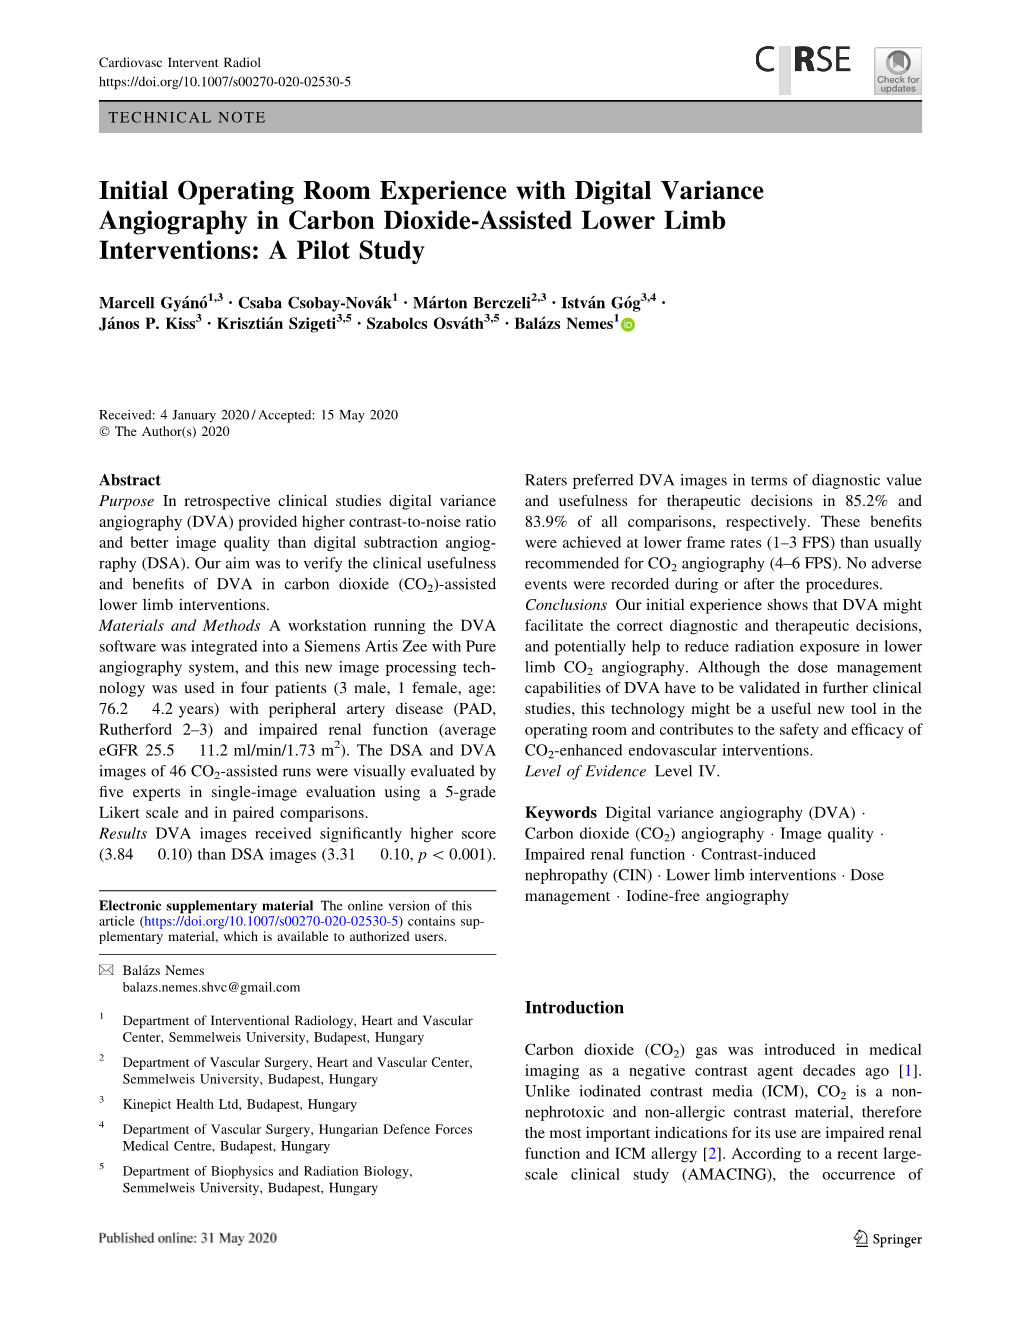 Initial Operating Room Experience with Digital Variance Angiography in Carbon Dioxide-Assisted Lower Limb Interventions: a Pilot Study